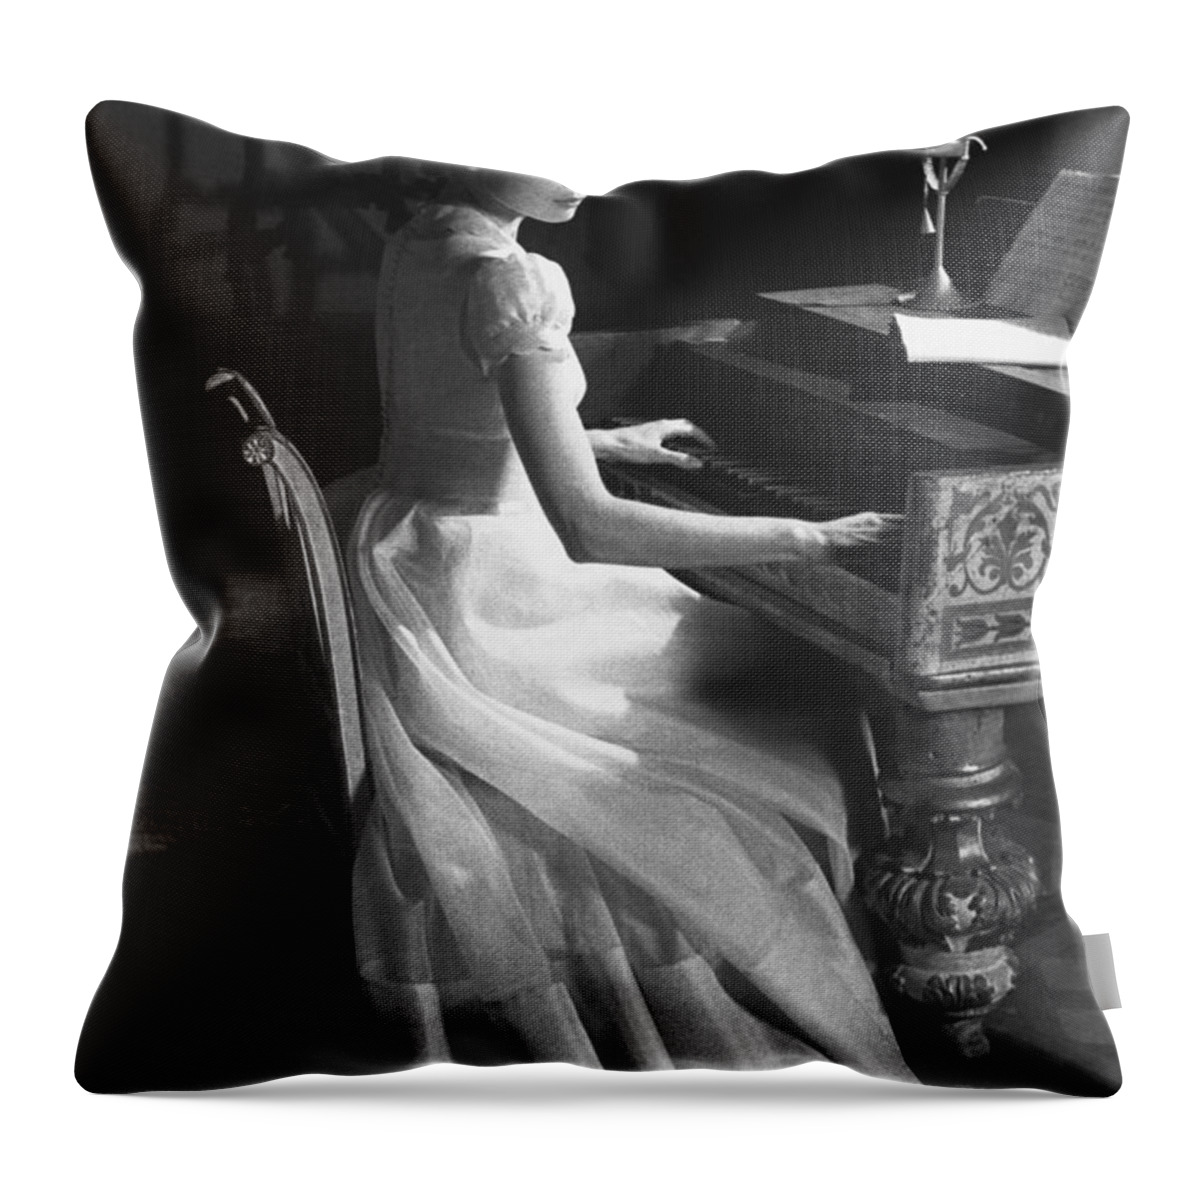 B&w Throw Pillow featuring the photograph Audrey Hepburn #3 by George Daniell